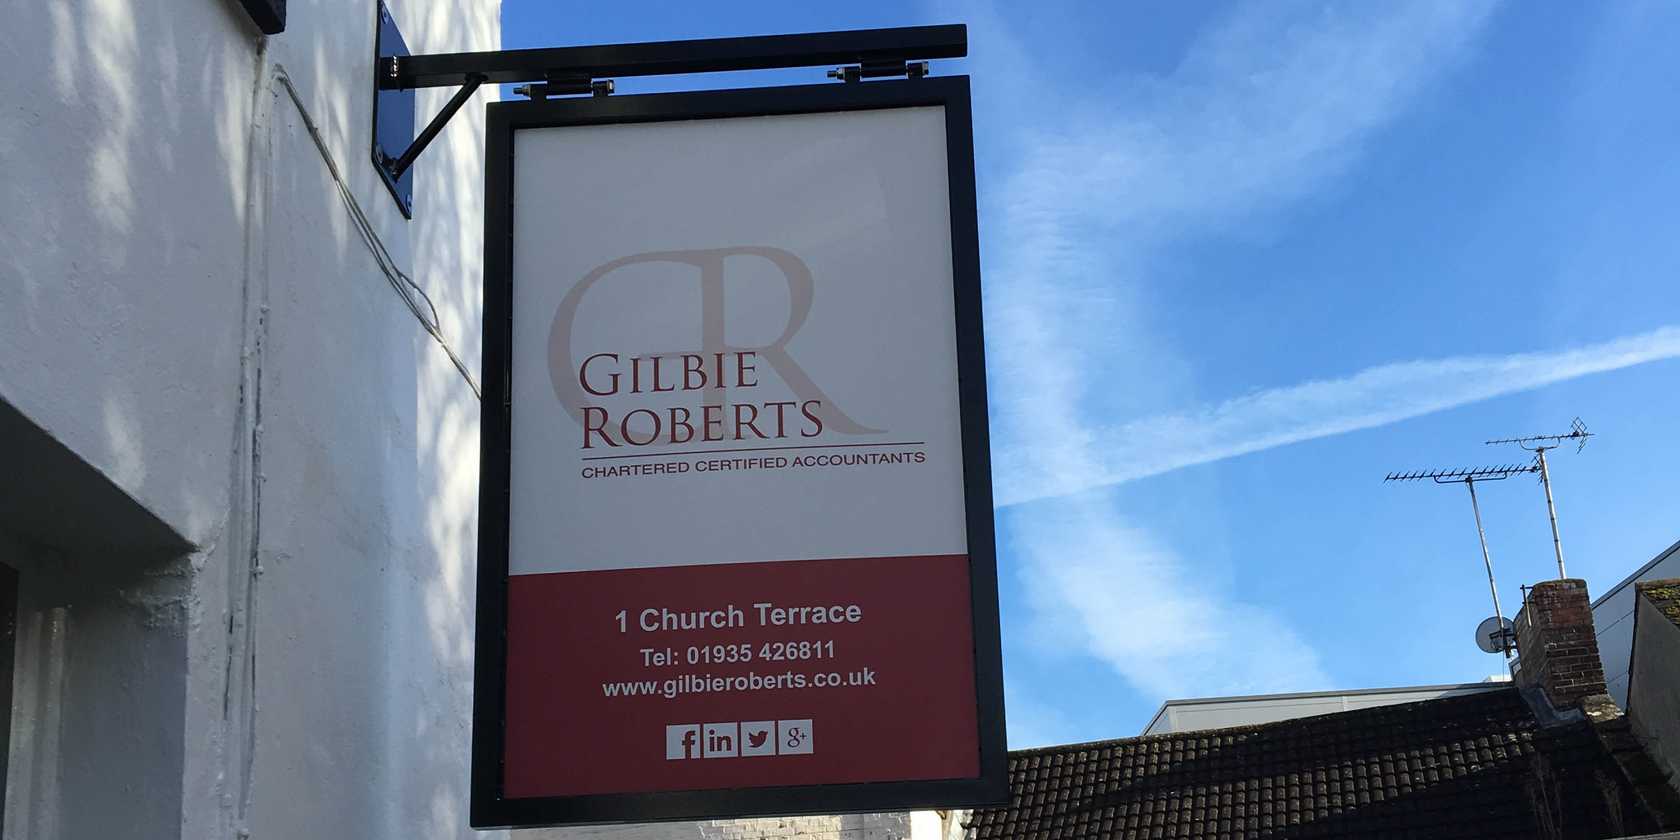 Hanging Swing Sign for Gilbie Roberts